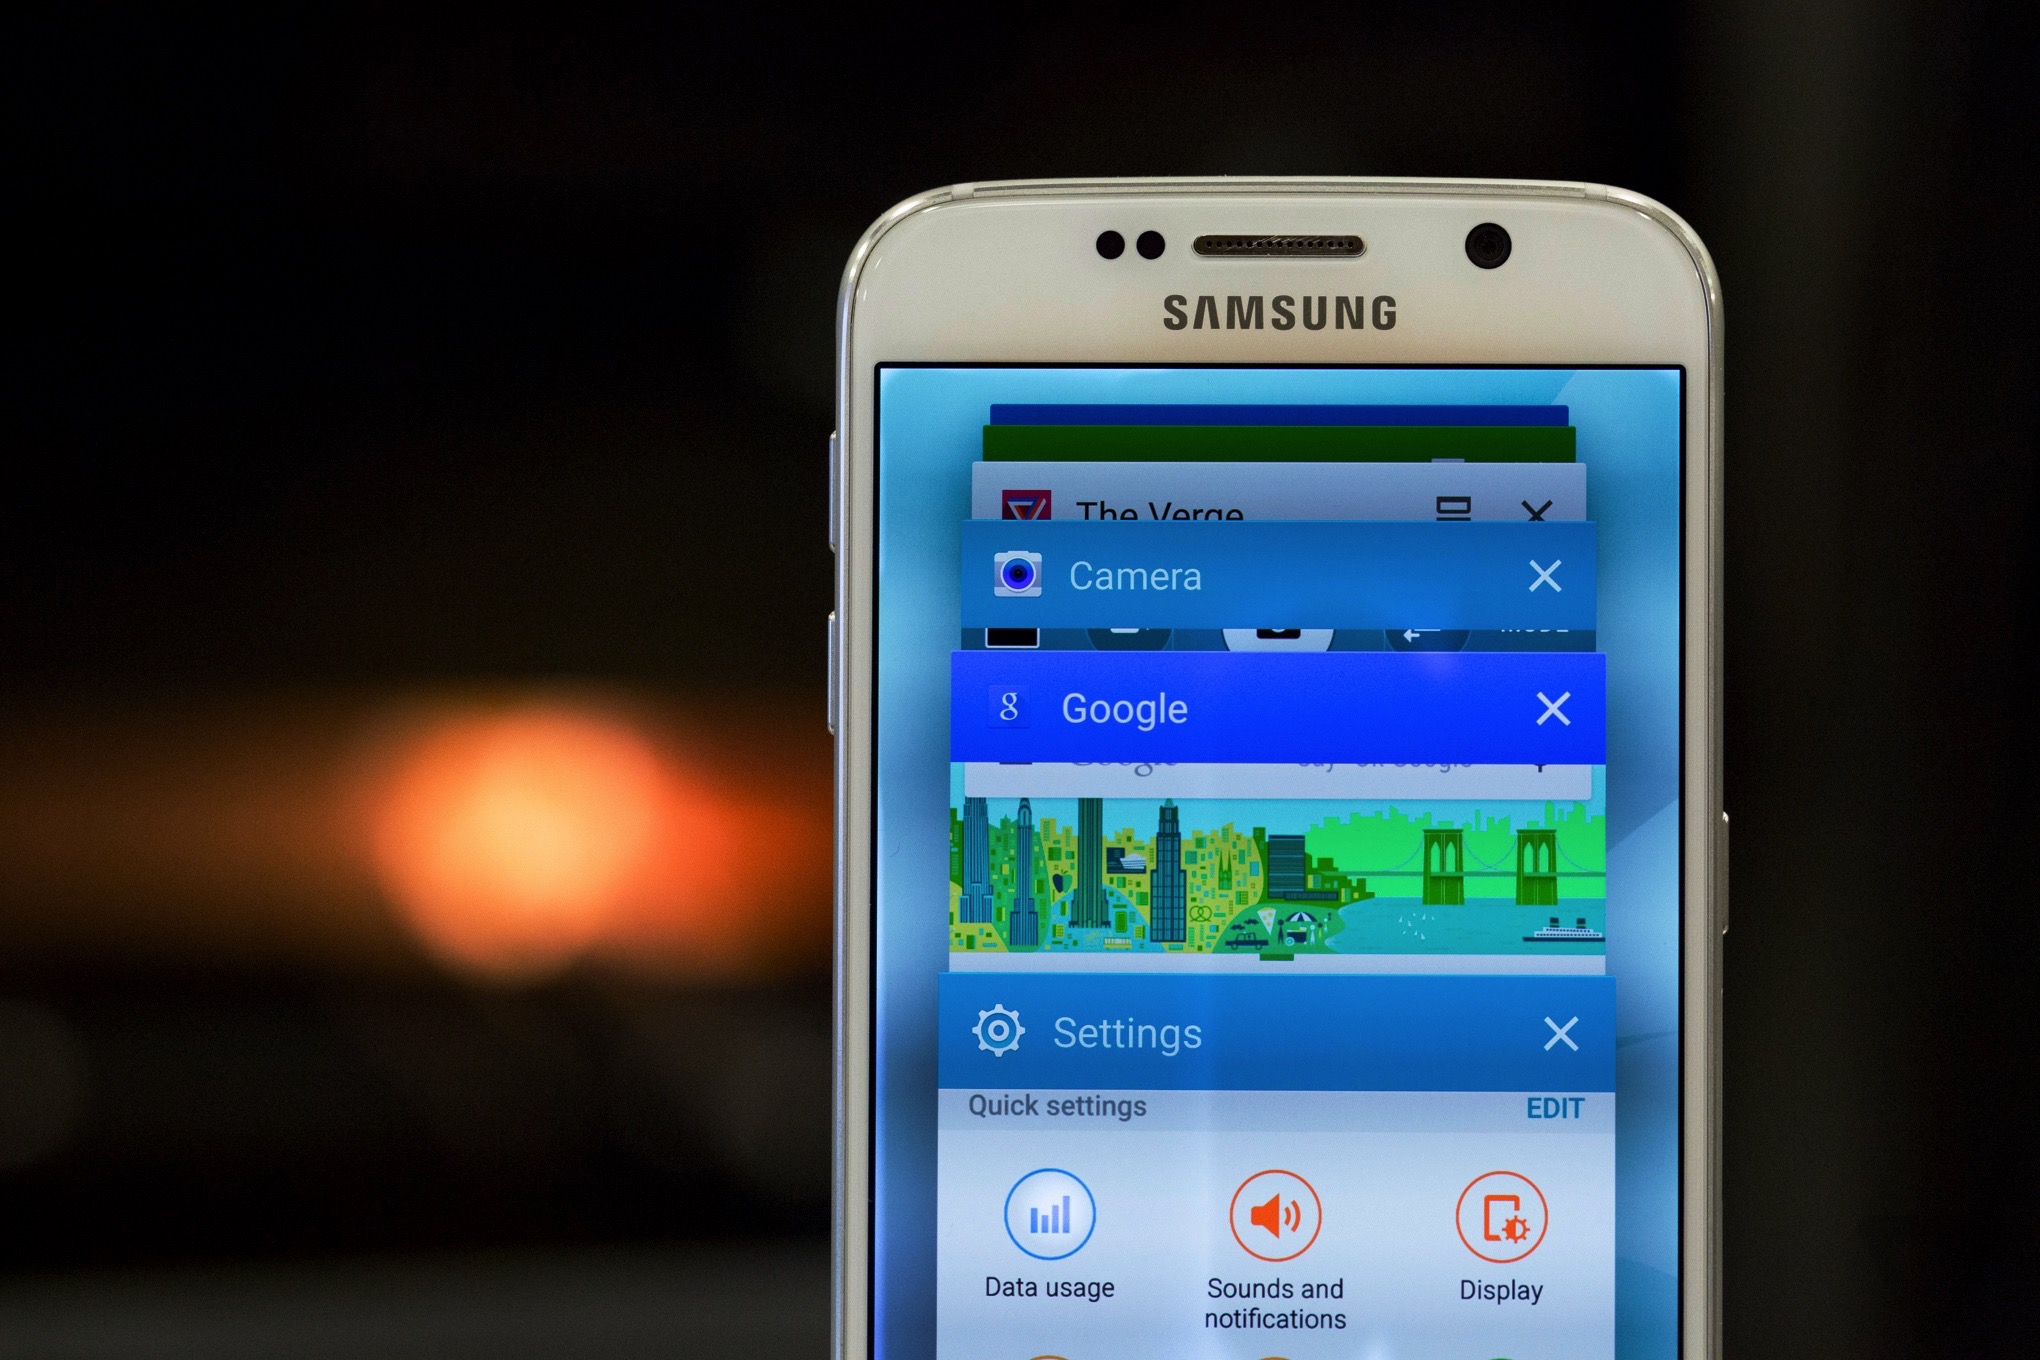 Galaxy S6 review images